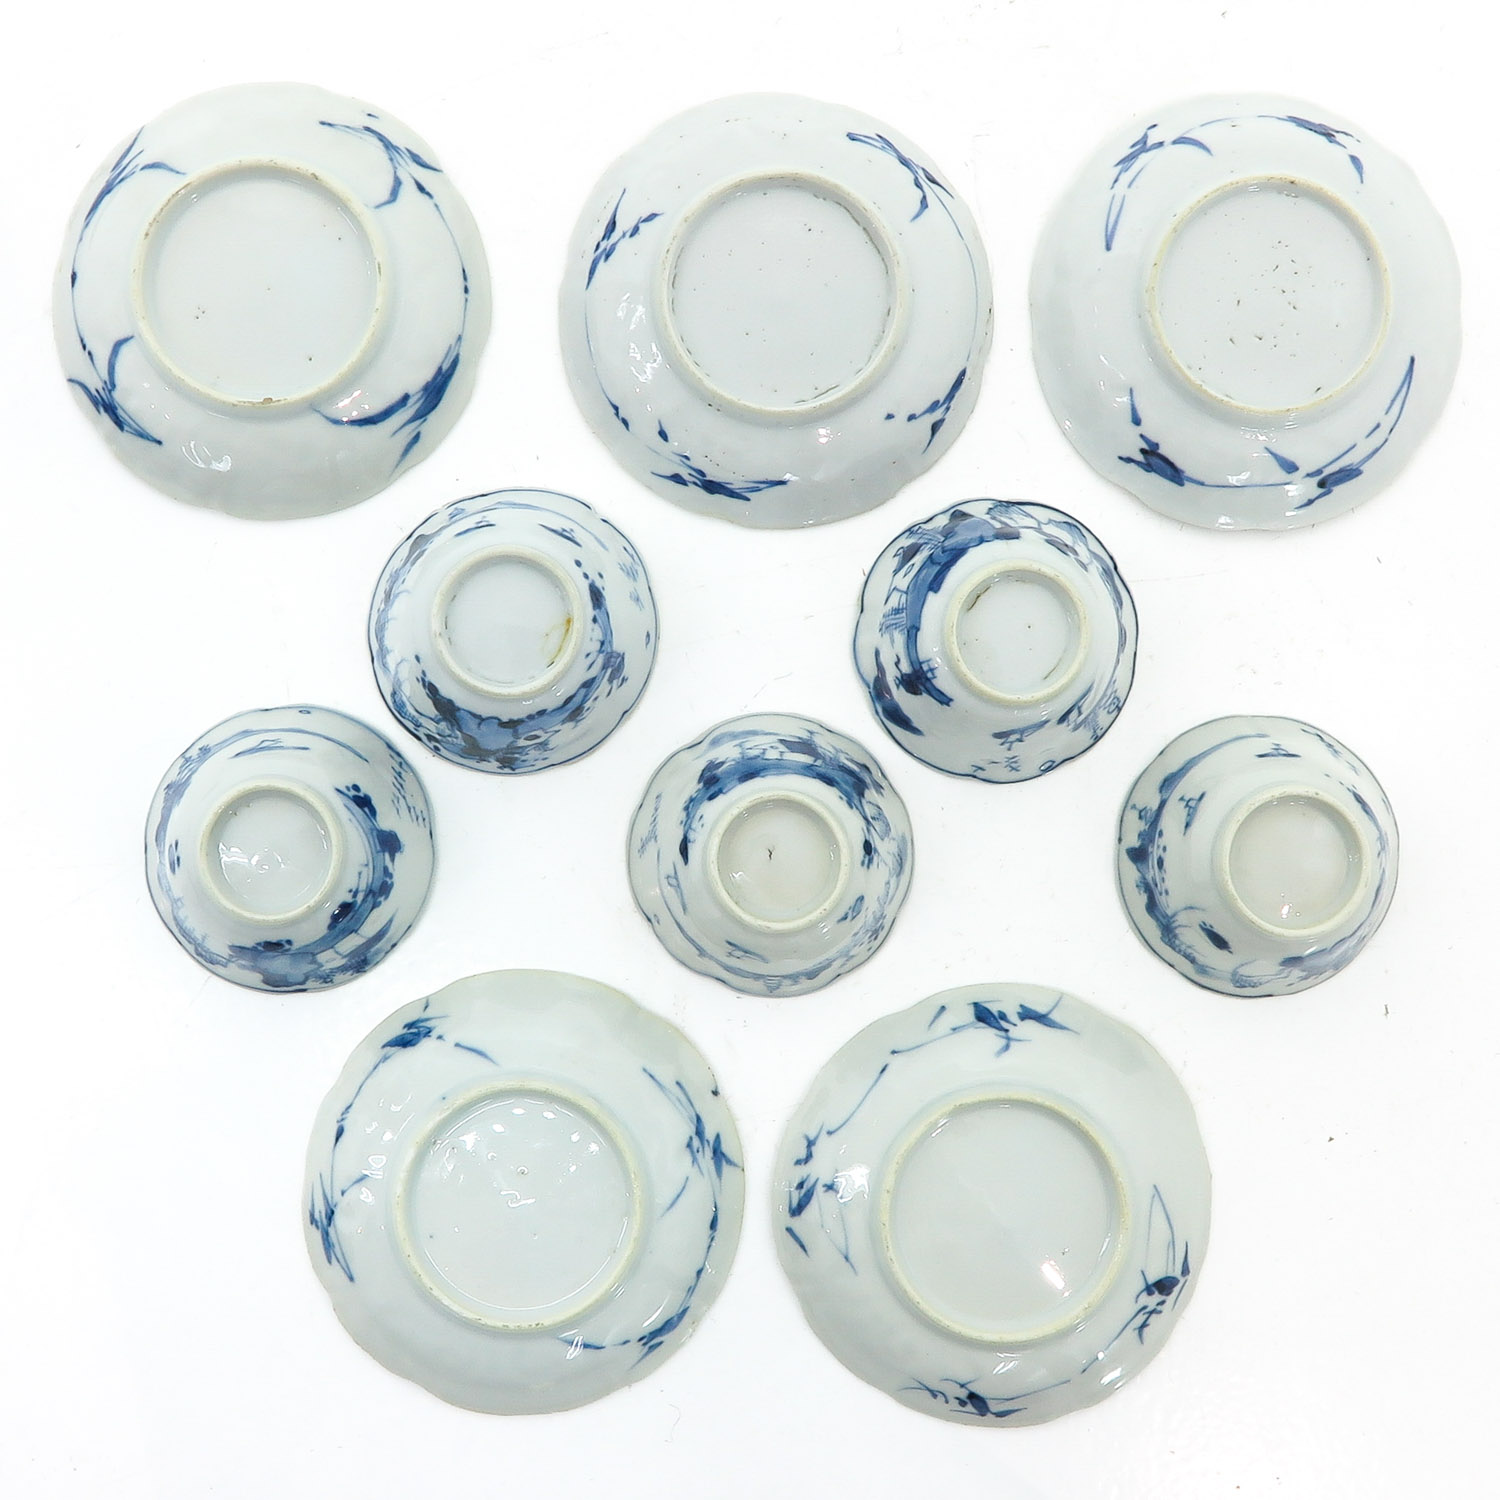 A Set of 5 Cups and Saucers - Image 6 of 10